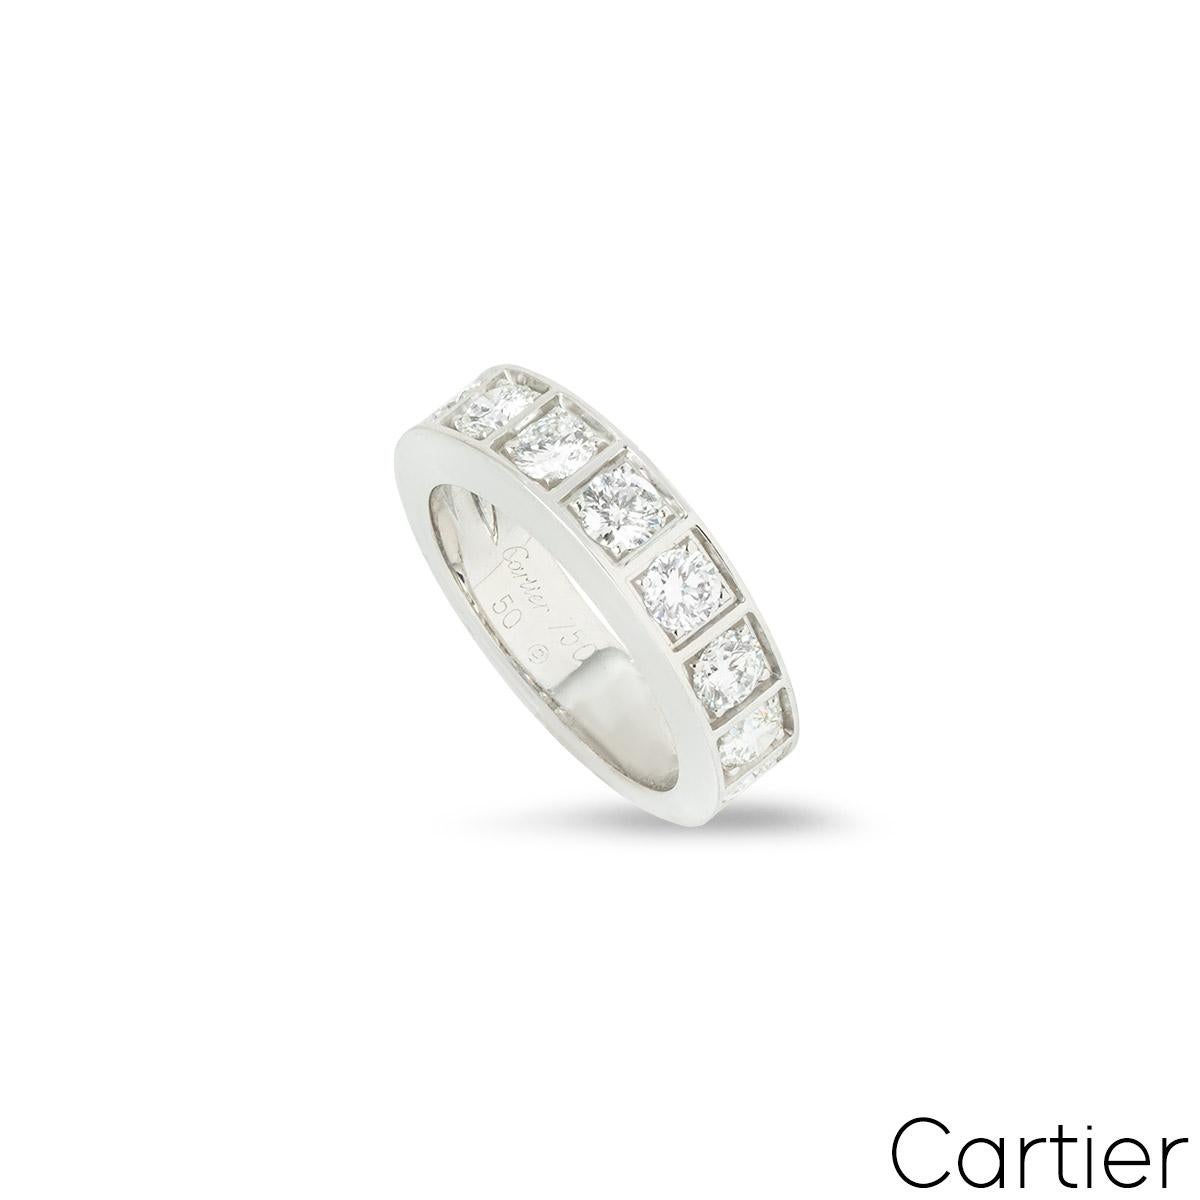 A beautiful 18k white gold half diamond set eternity ring by Cartier. The ring is comprised of 9 round brilliant cut claw set diamonds, each in an individual square surround. The diamonds have a total carat weight of approximately 1.35ct, and are